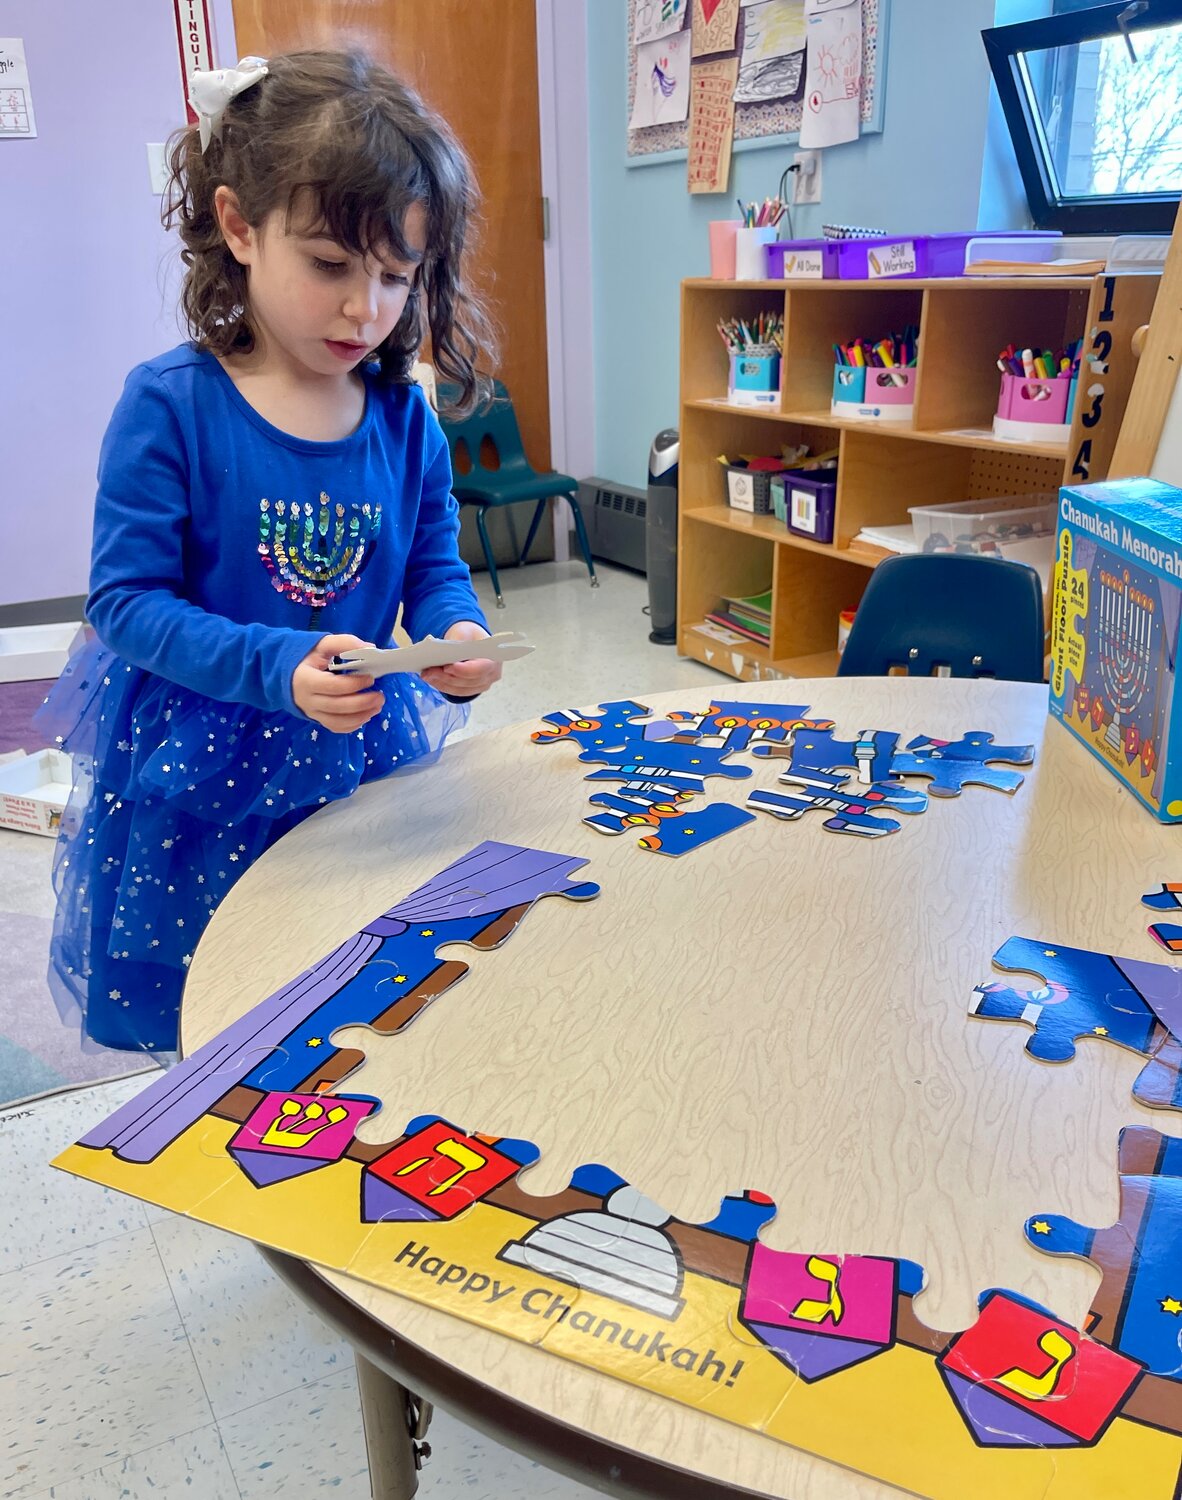 Jewish Community Day School of Rhode Island students enjoy the Festival of Lights during Hanukkah this year. Puzzles, dreidels, storytelling and so much more for a fun-filled eight days.